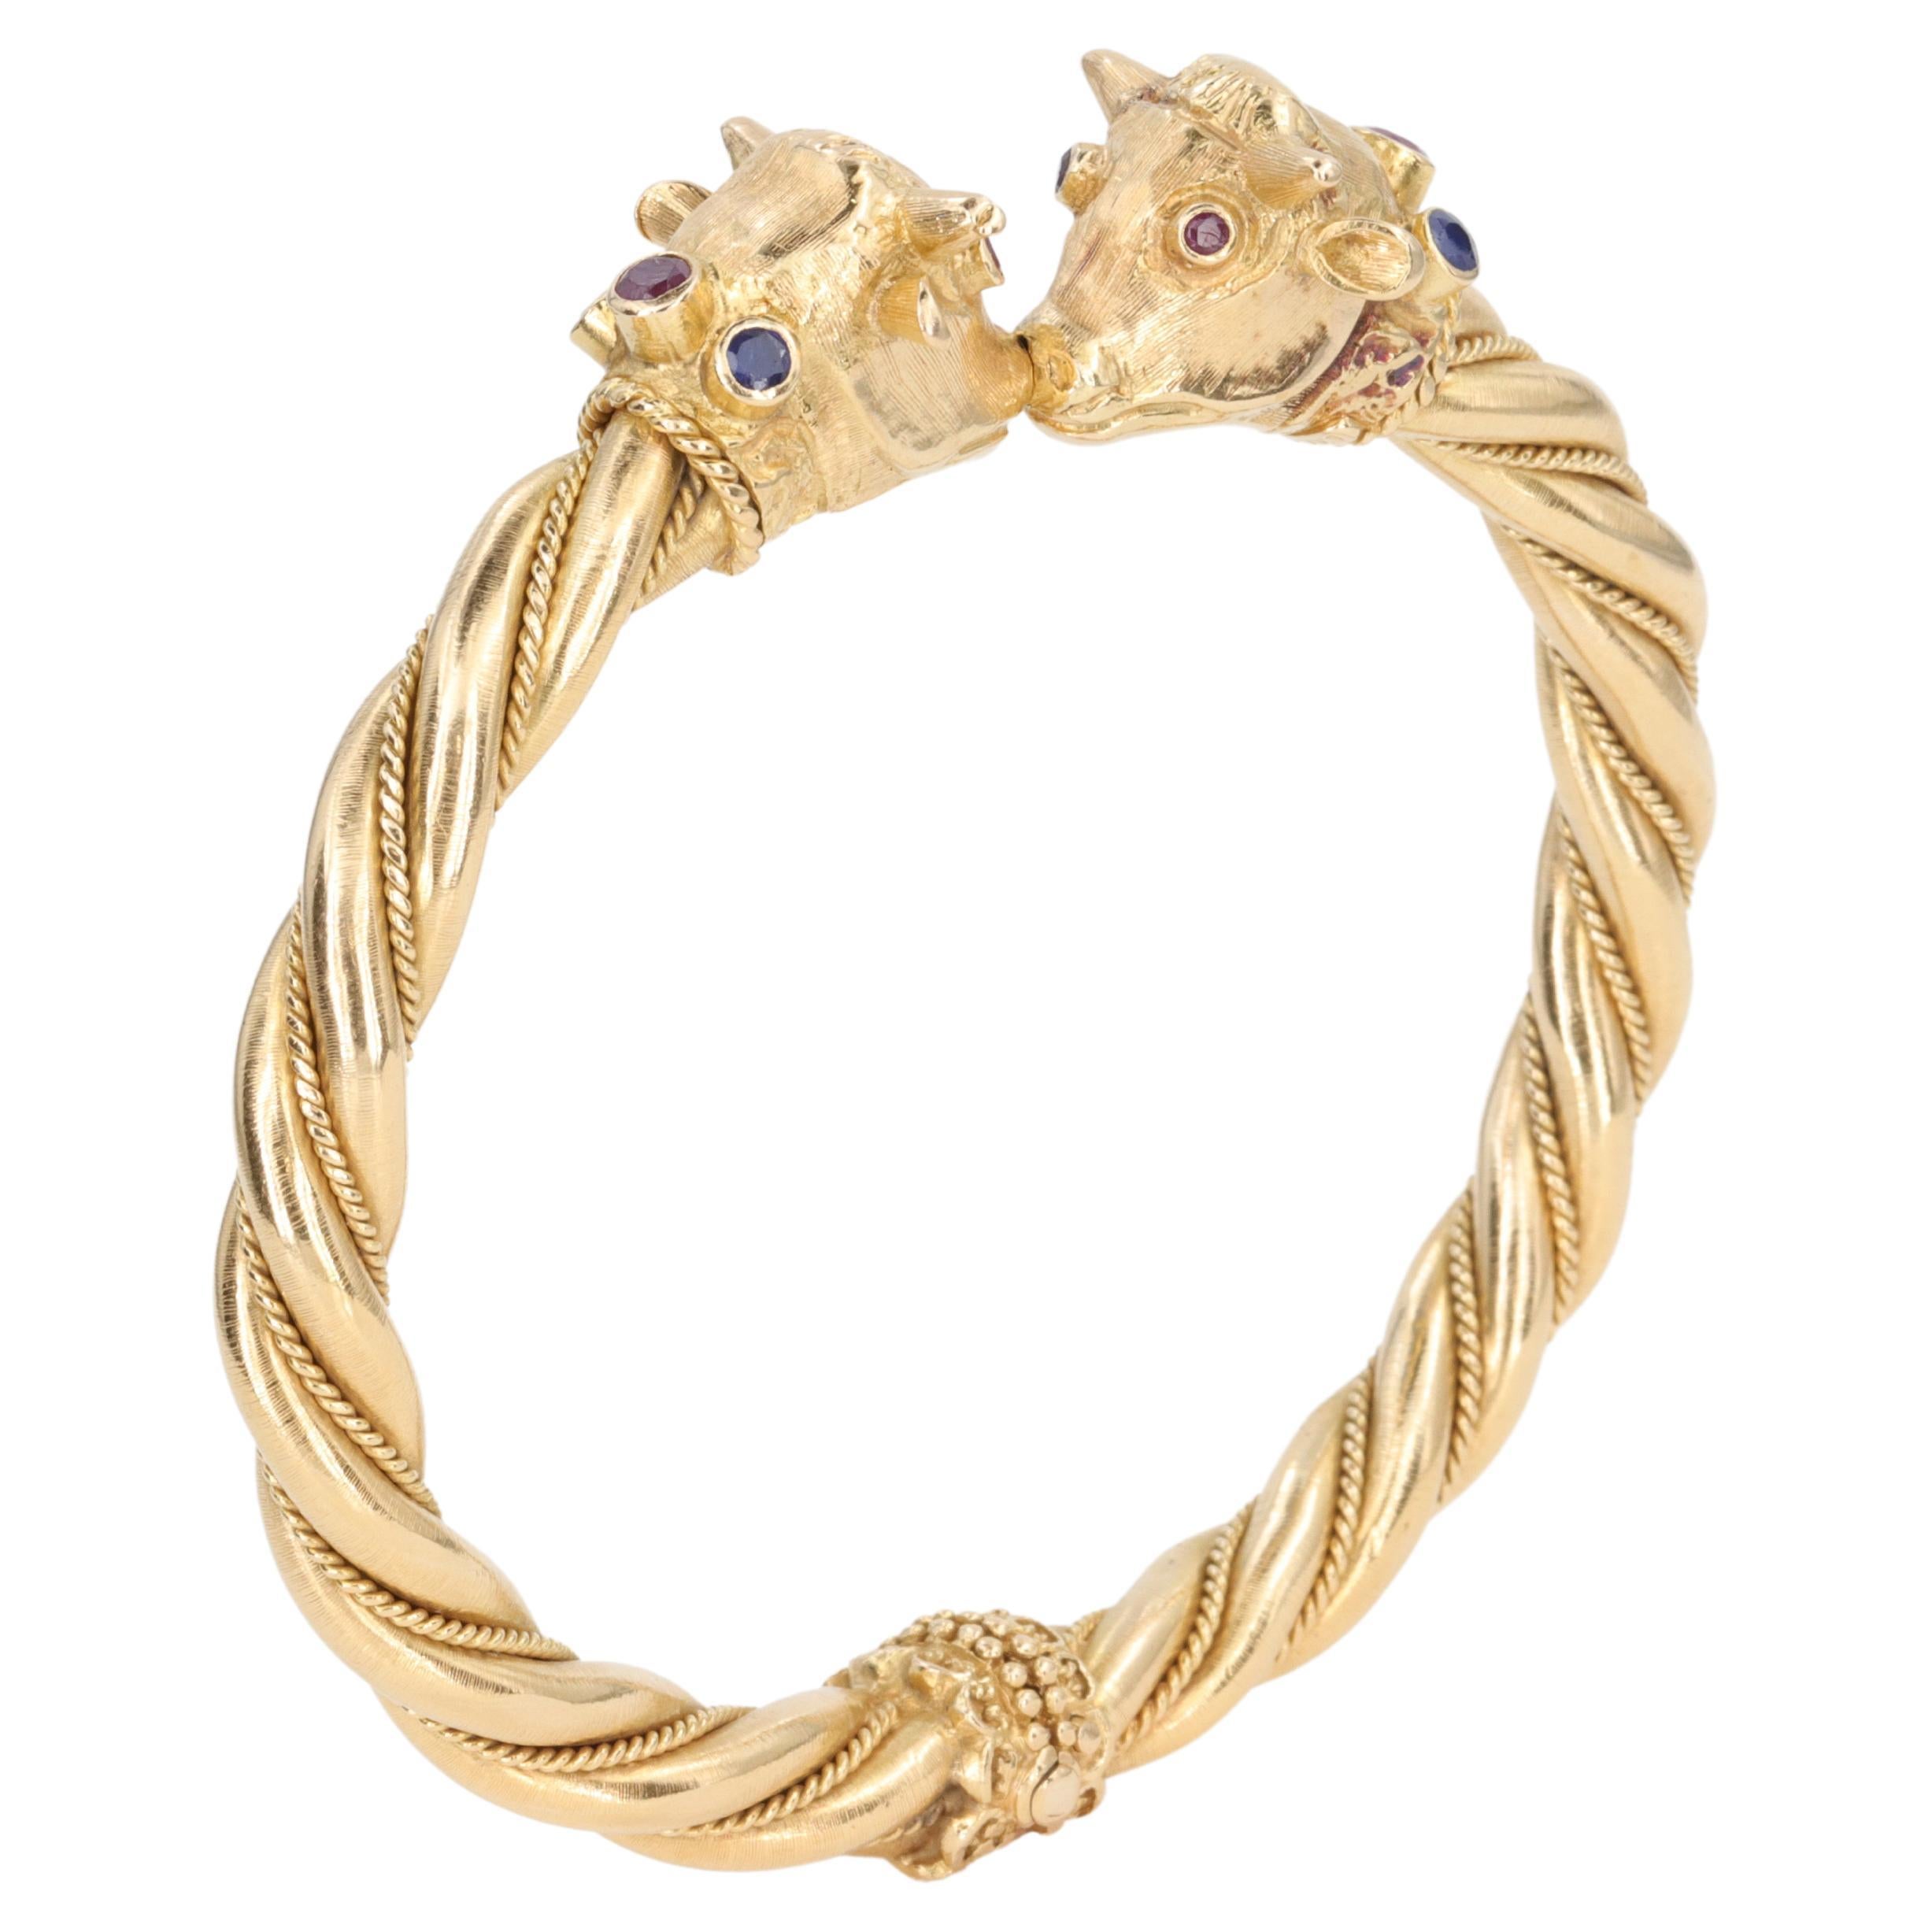 Ilias Lalaounis Bull Bangle Bracelet in Yellow Gold, Ruby & Sapphire For Sale